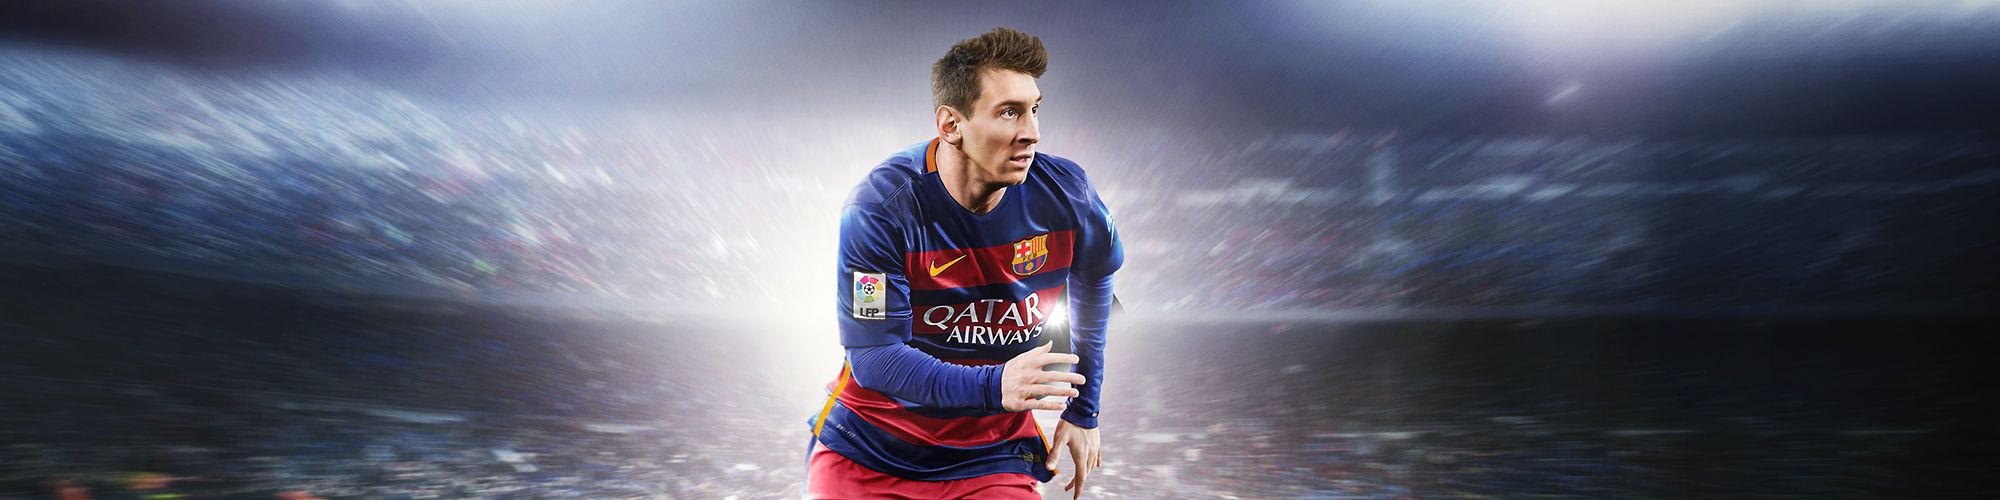 FIFA 16 technical specifications for laptop